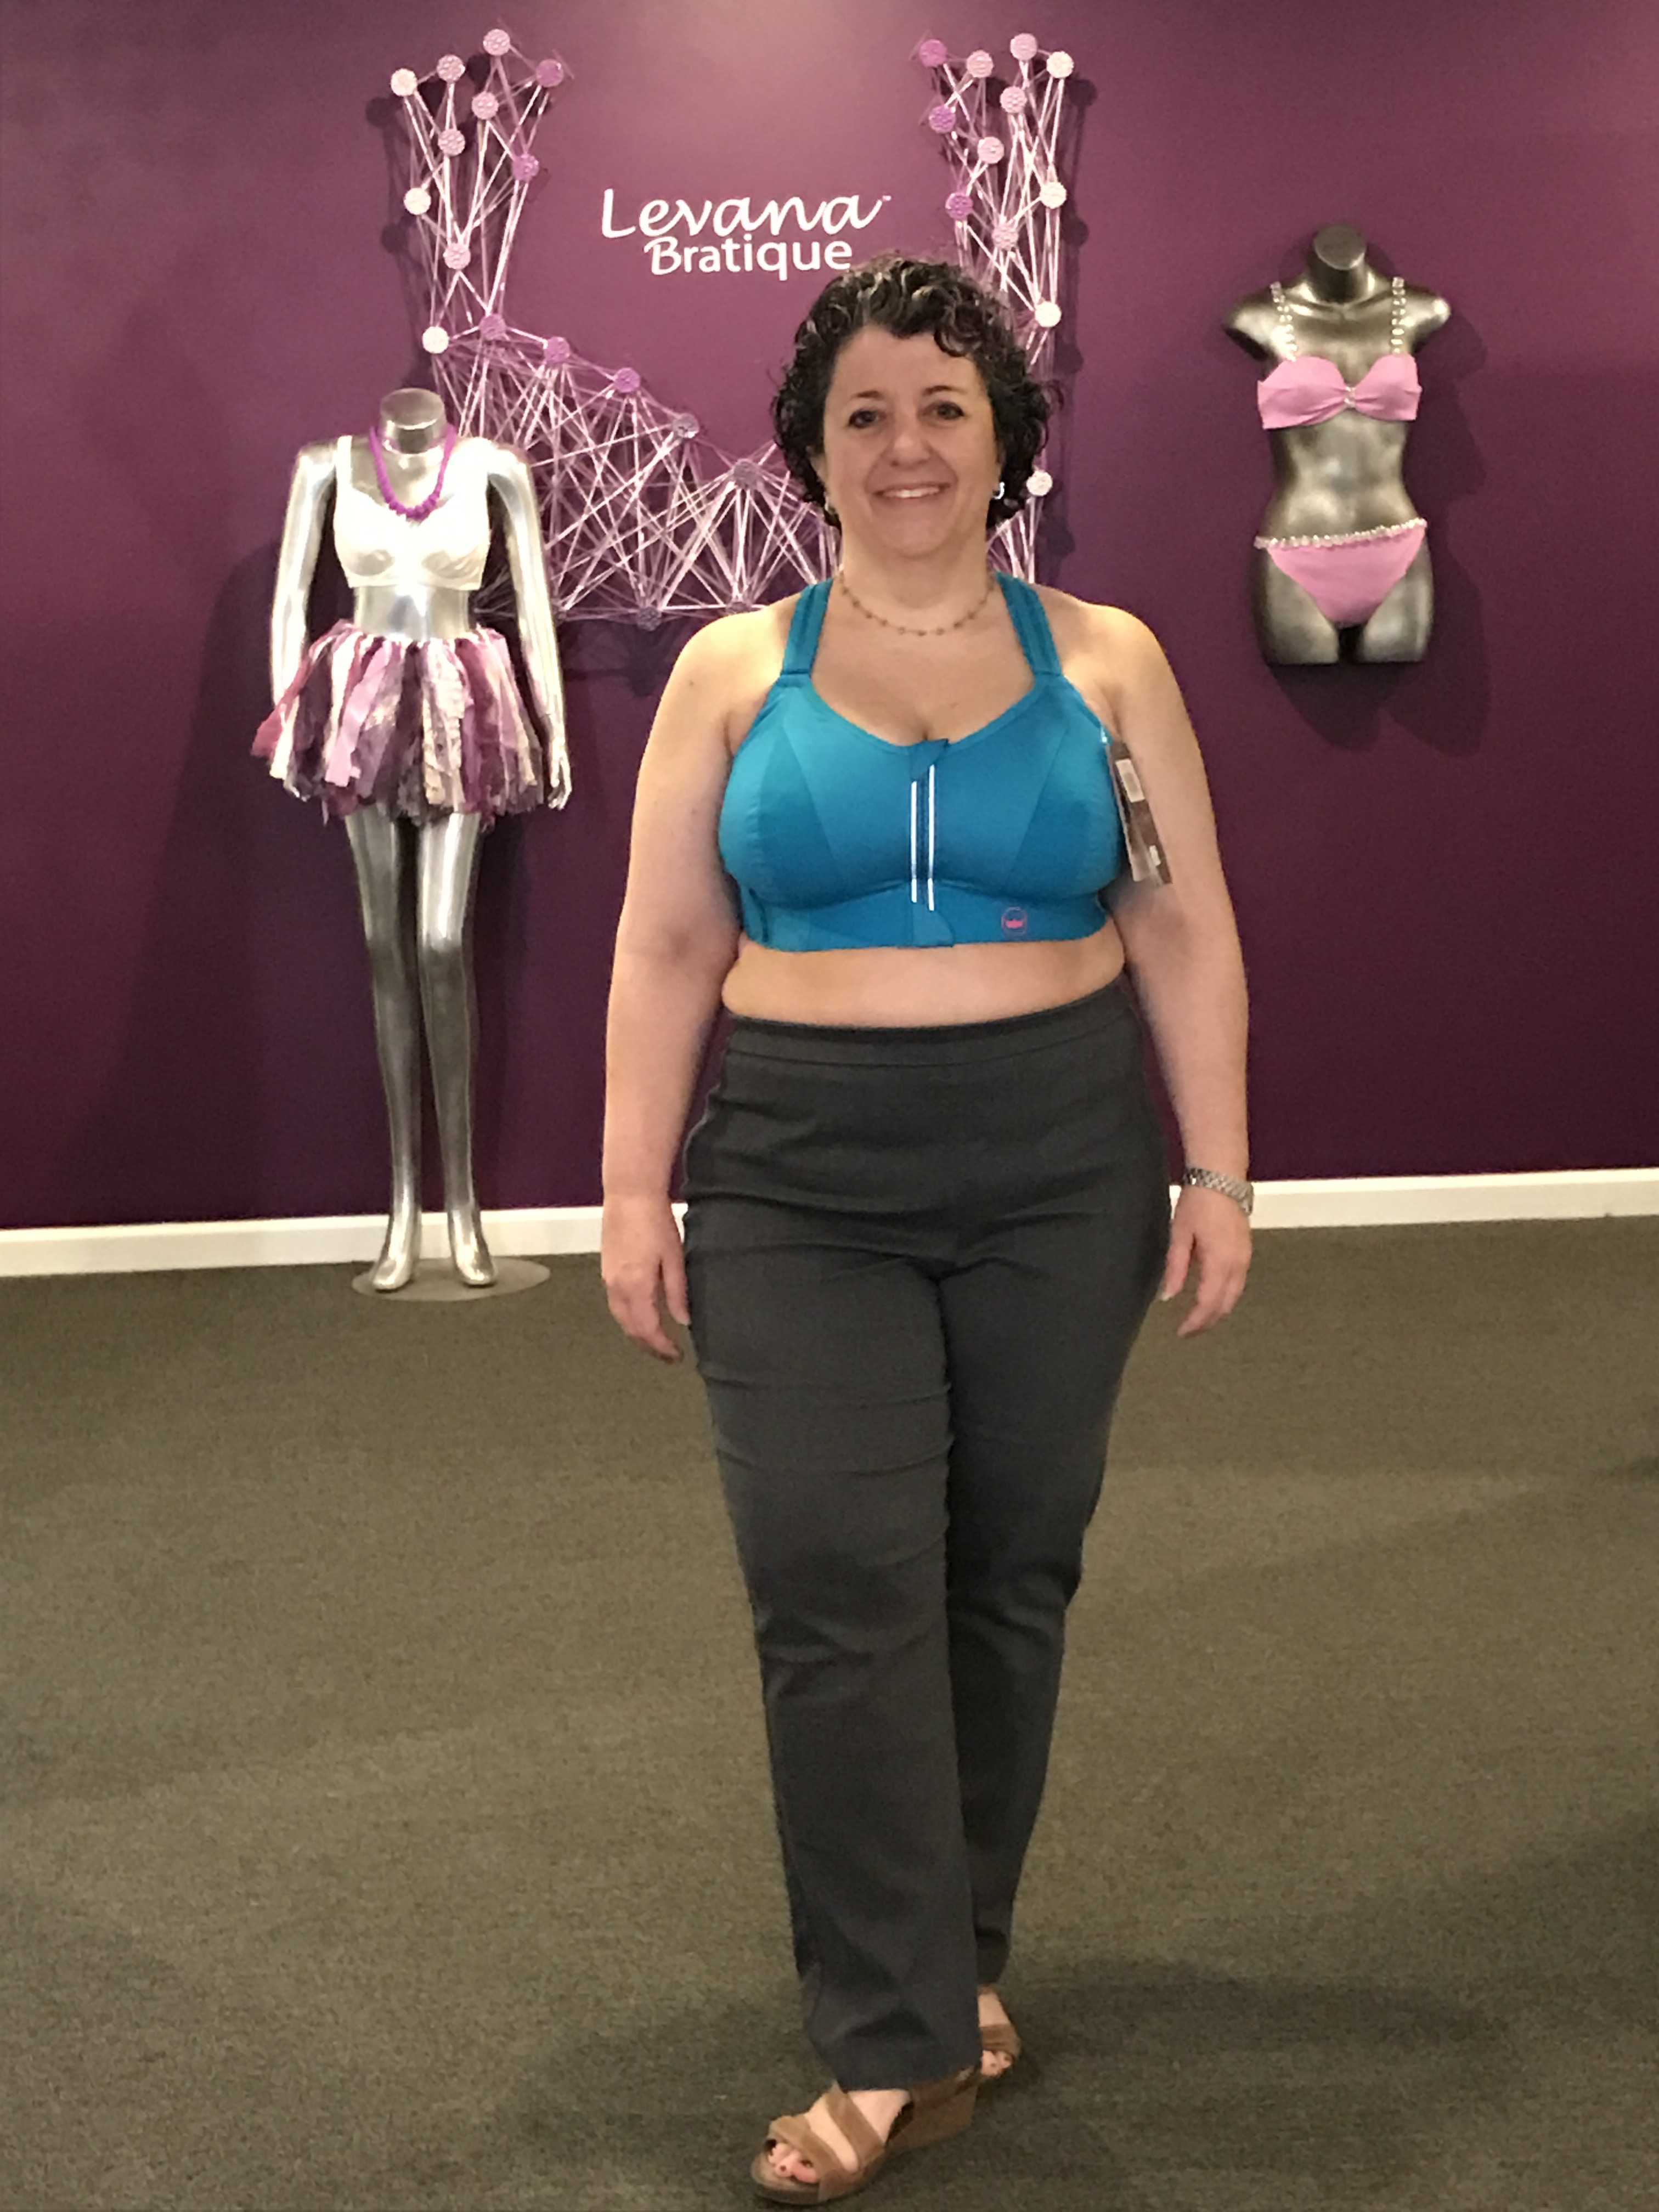 D+ Bra Fittings During a Pandemic–Checking in with Levana Bratique